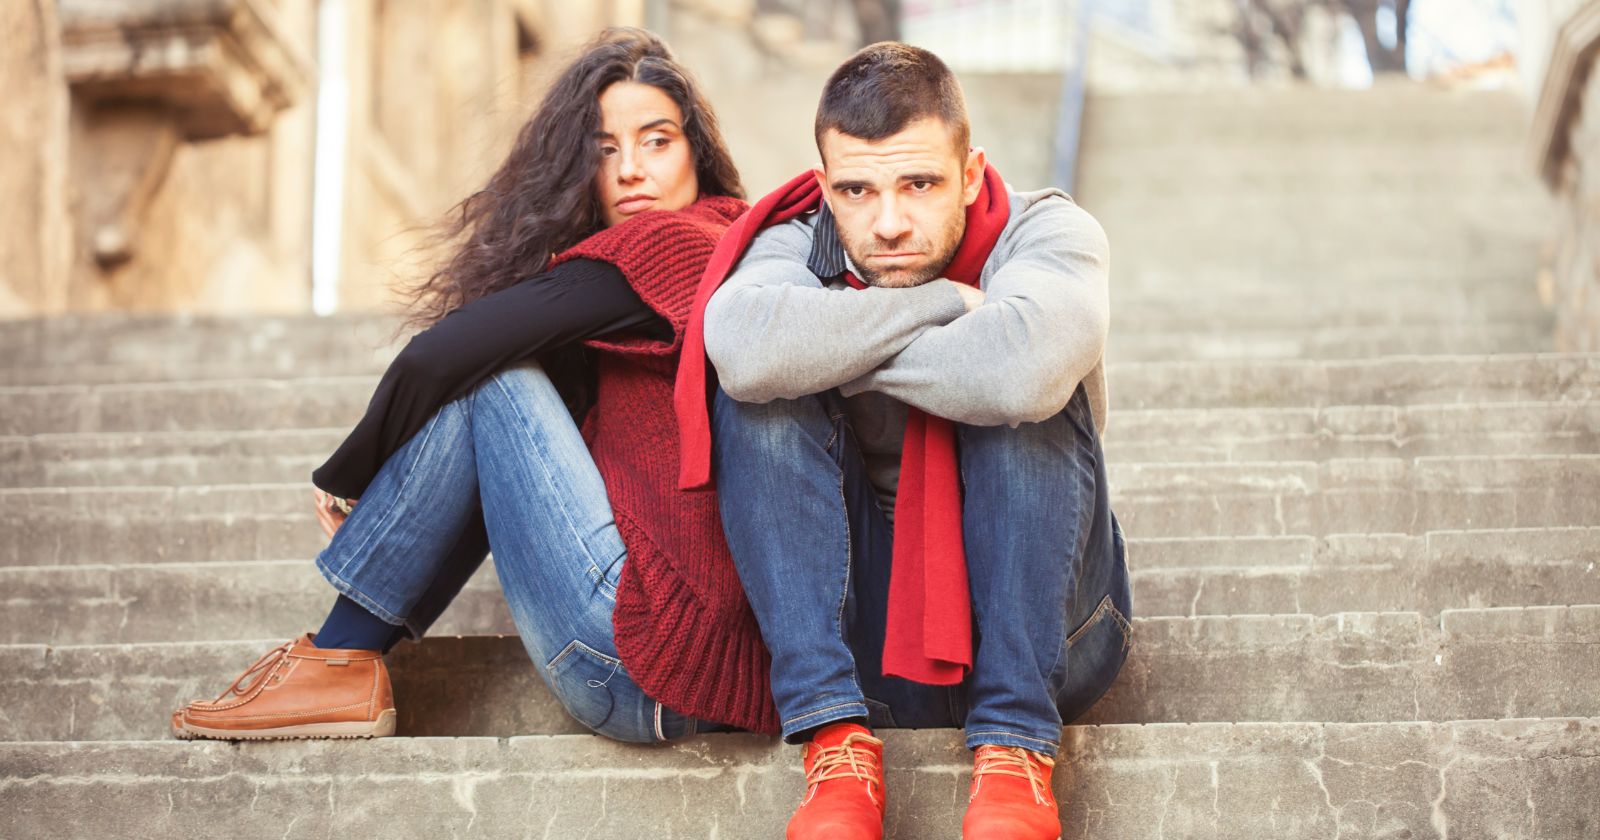 13 behaviors only highly observant people notice in a relationship 1 12 red flags to look out for in the early stages of a relationship